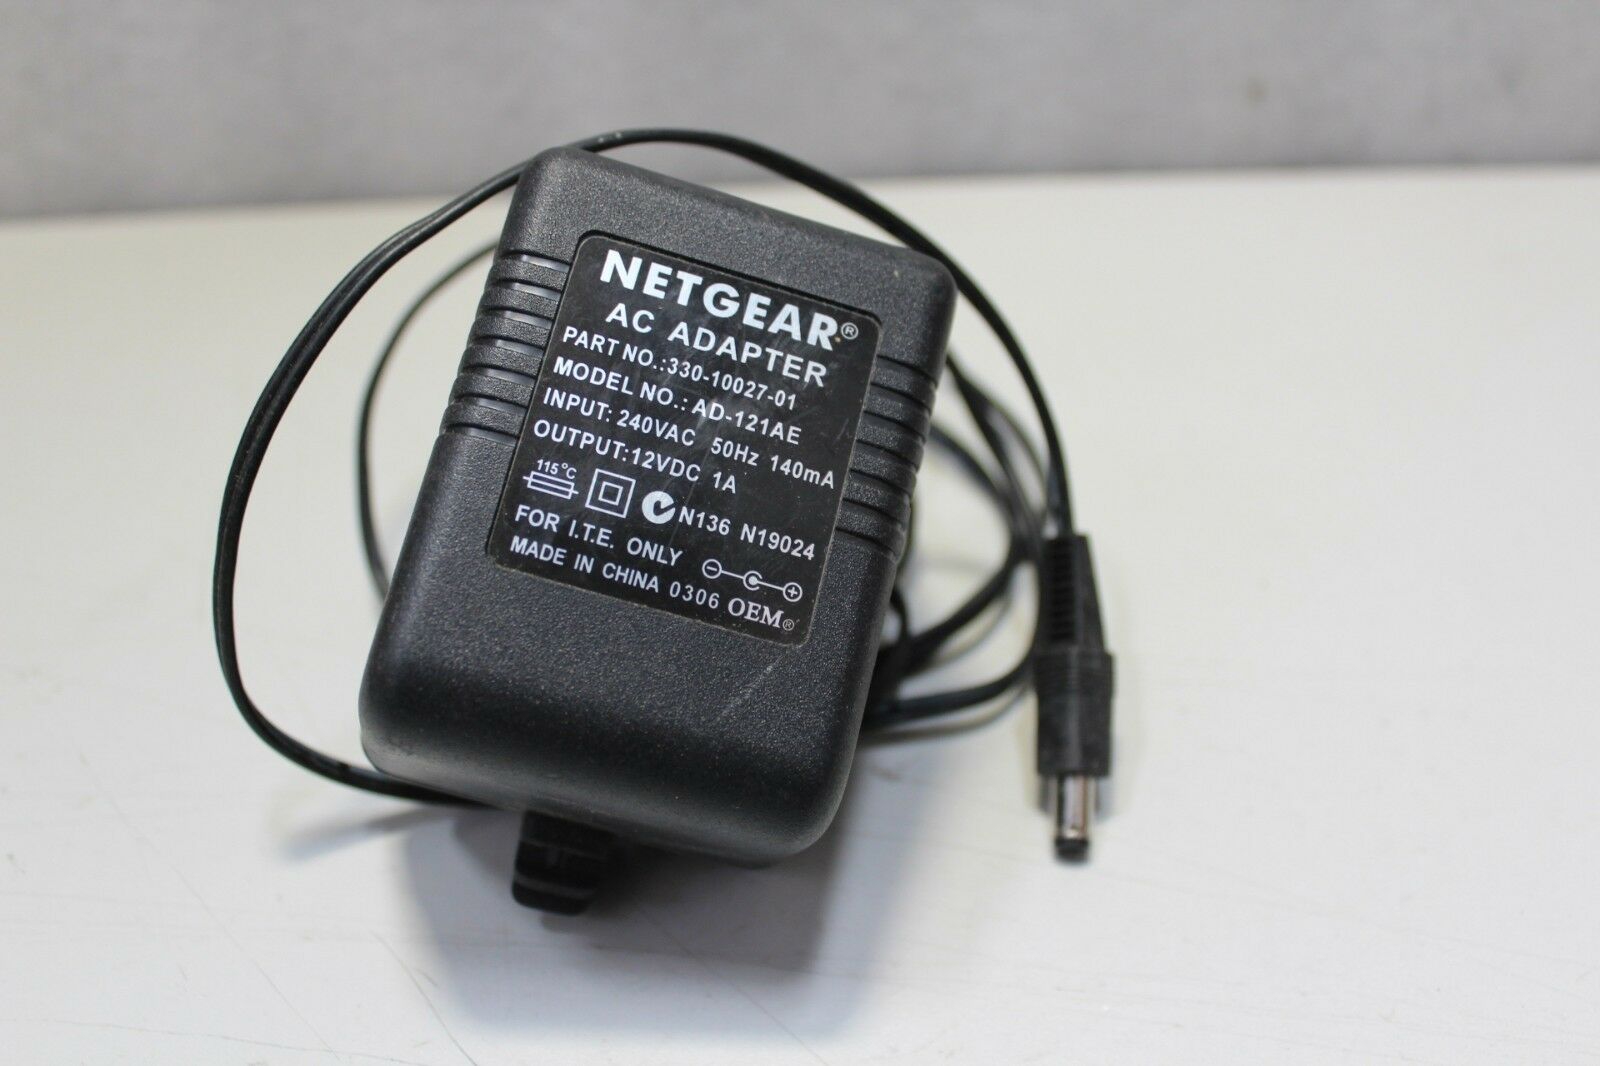 NEW NETGEAR AD-121AE 330-10027-01 12VDC 1A AC Adapter Charger - Click Image to Close